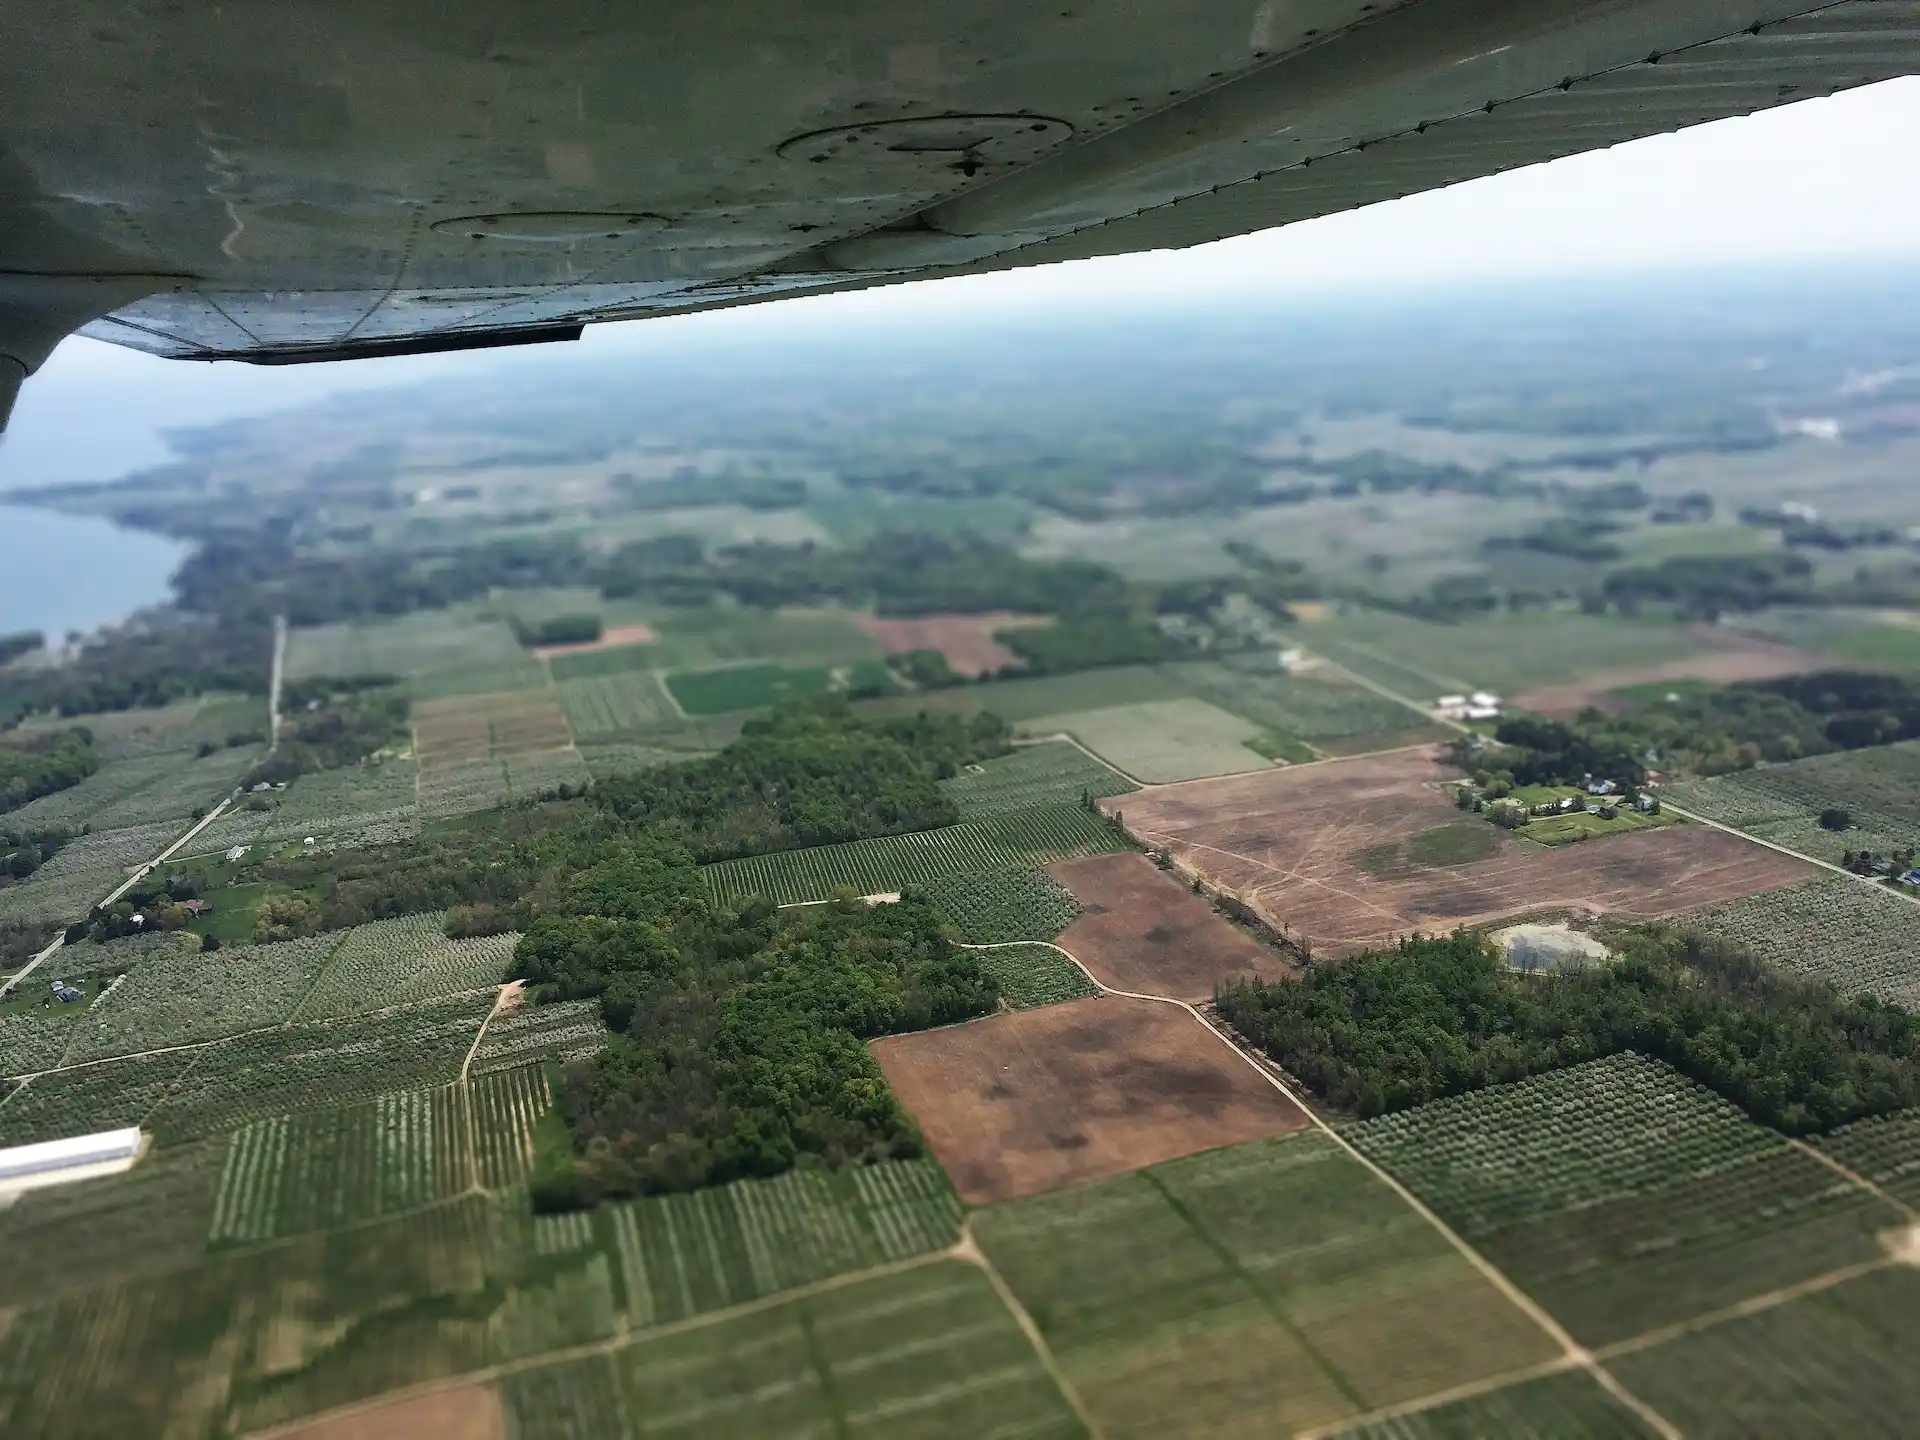 exploring rural areas from the airplane